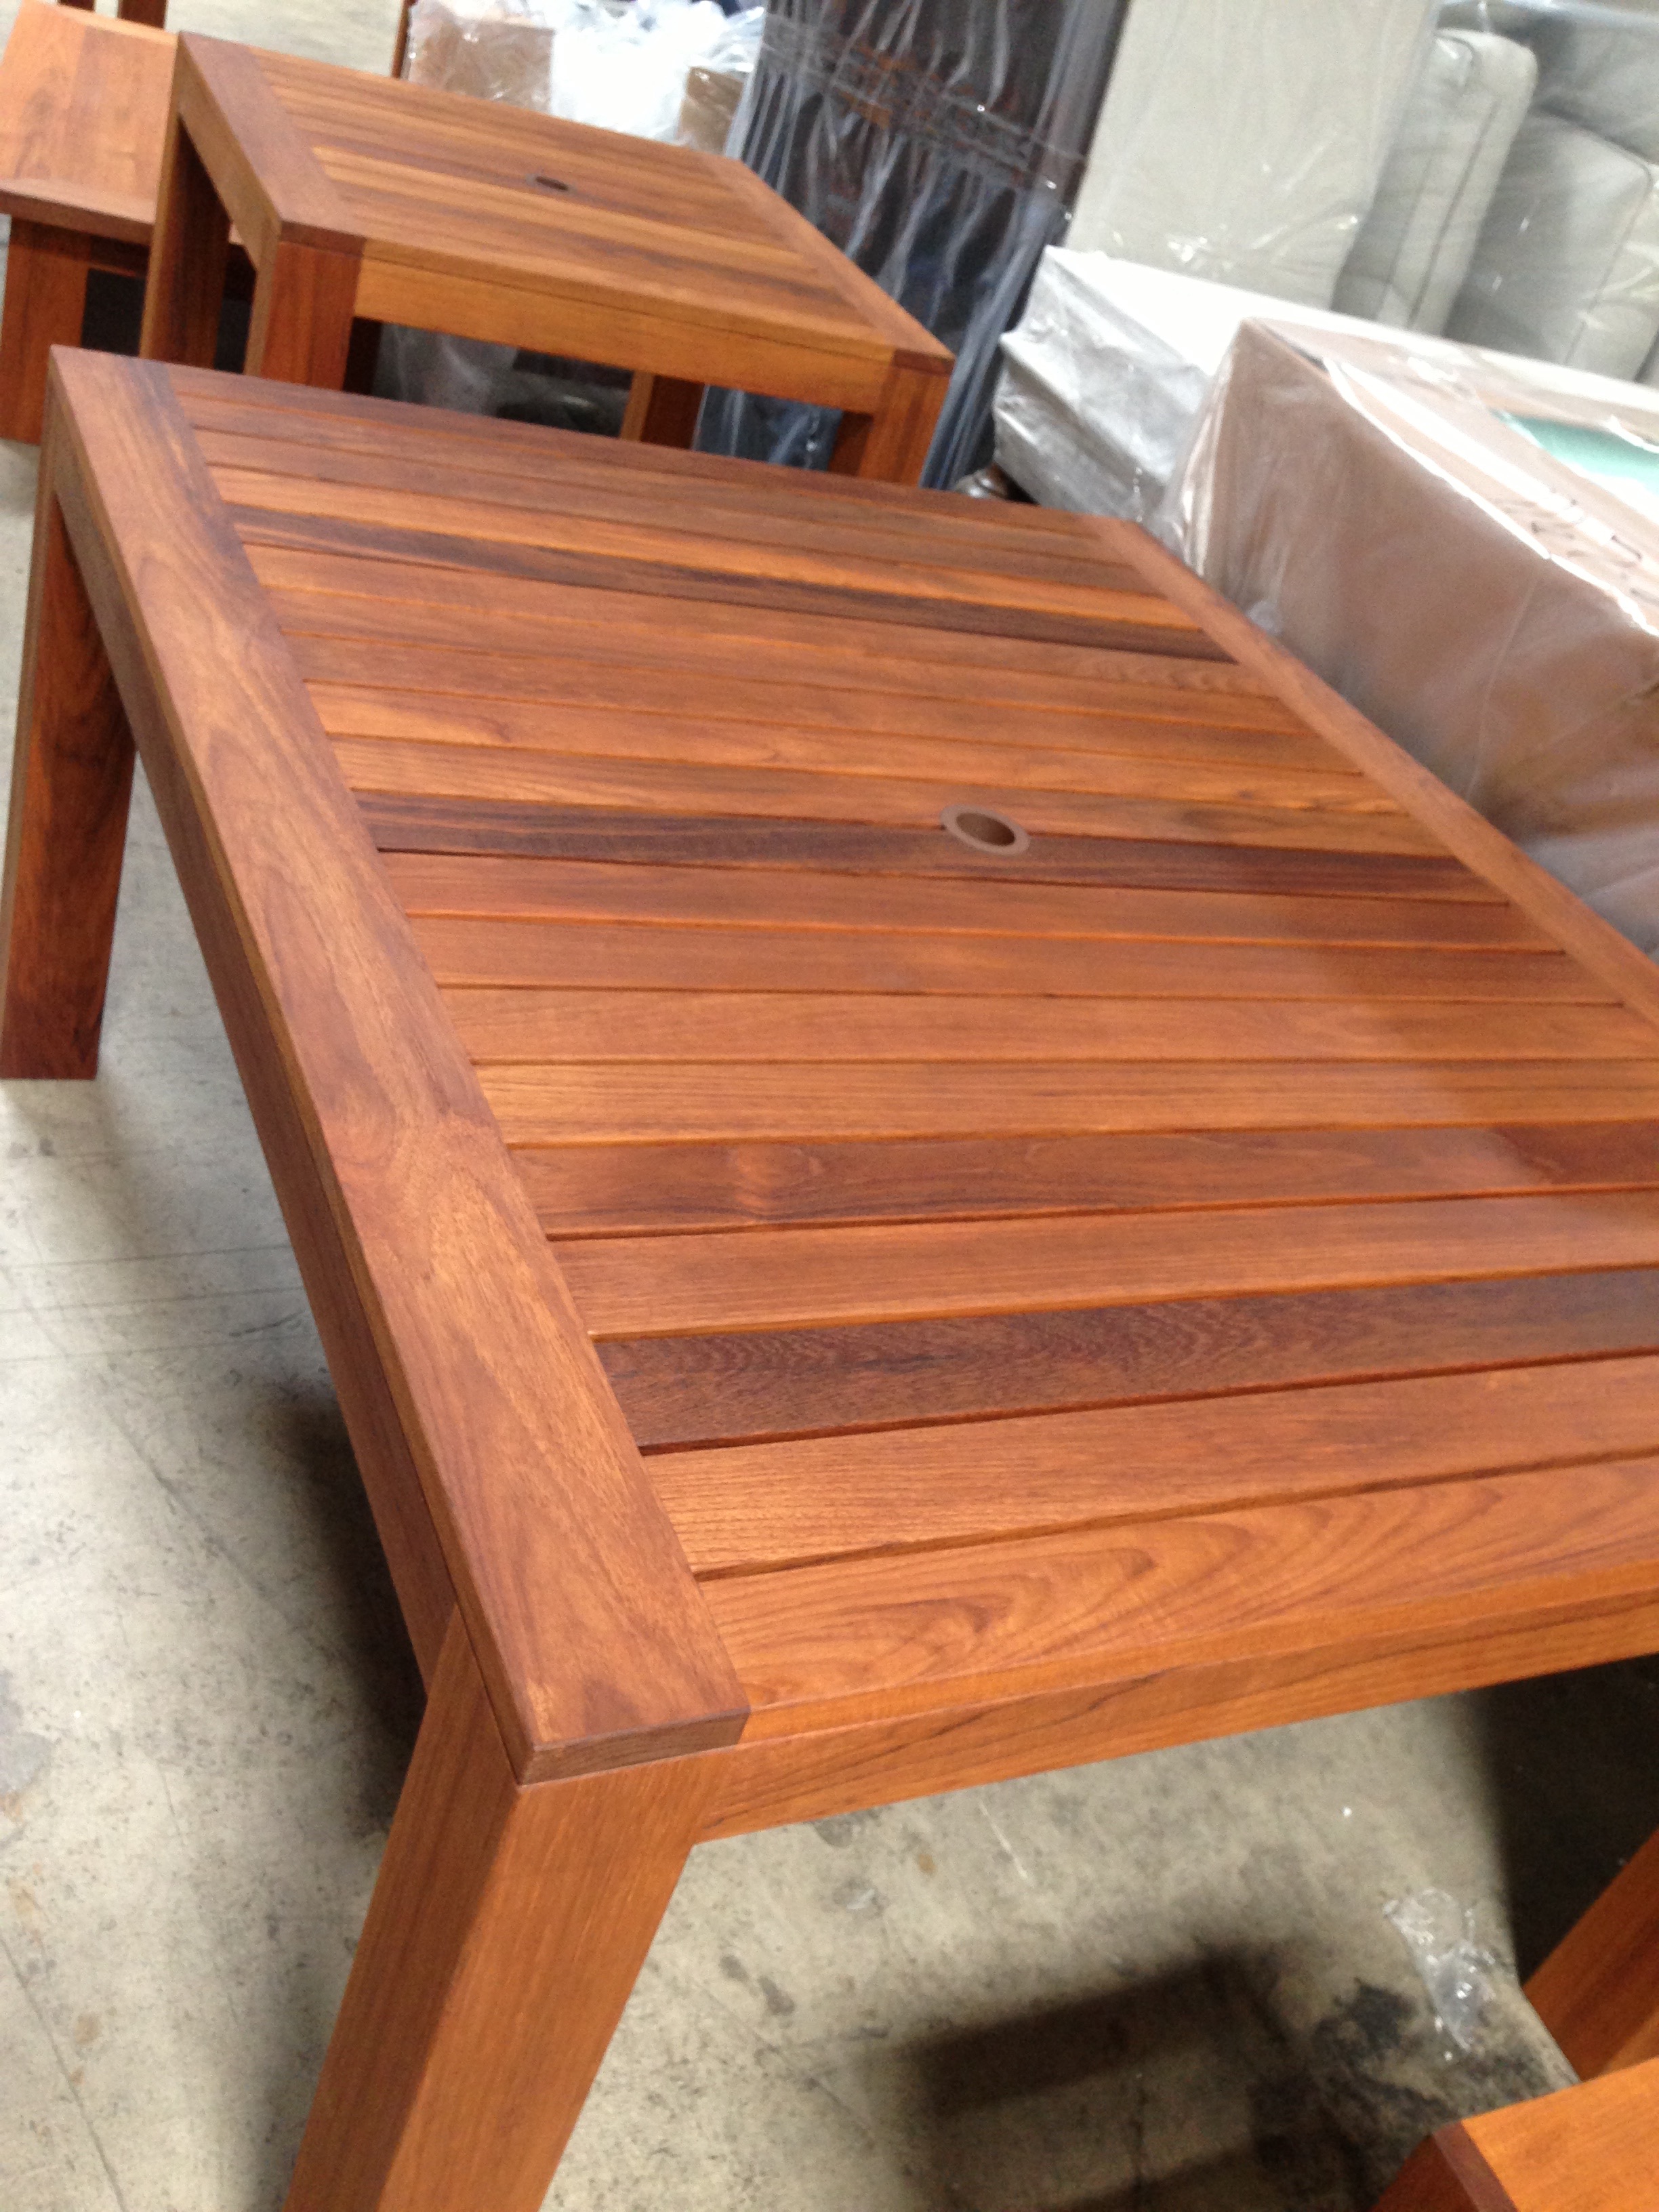 Teak Wood Furniture Manufacturer: Crafting Eco Friendly And Long Lasting Pieces For Your Home